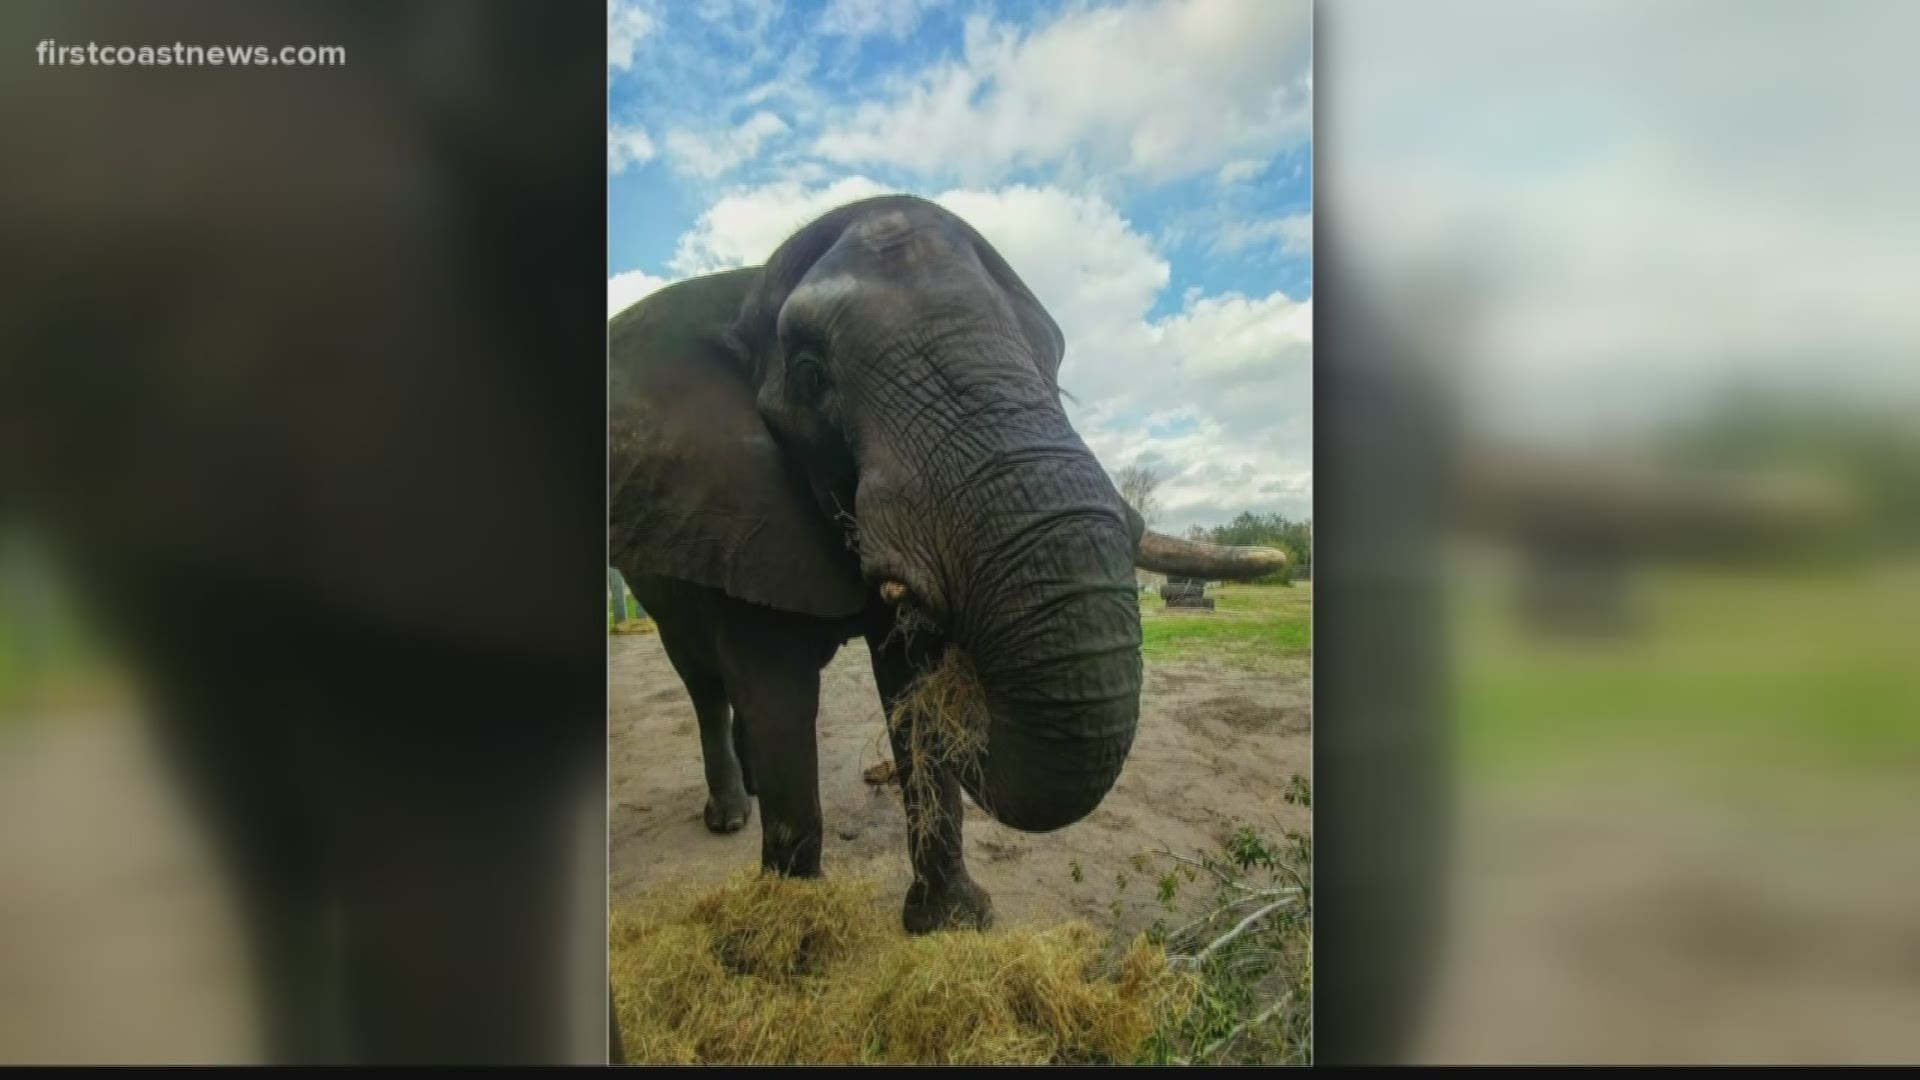 An elephant that was originally from Michael Jackson's Neverland Ranch briefly escaped his enclosure at the Jacksonville Zoo on Sunday.